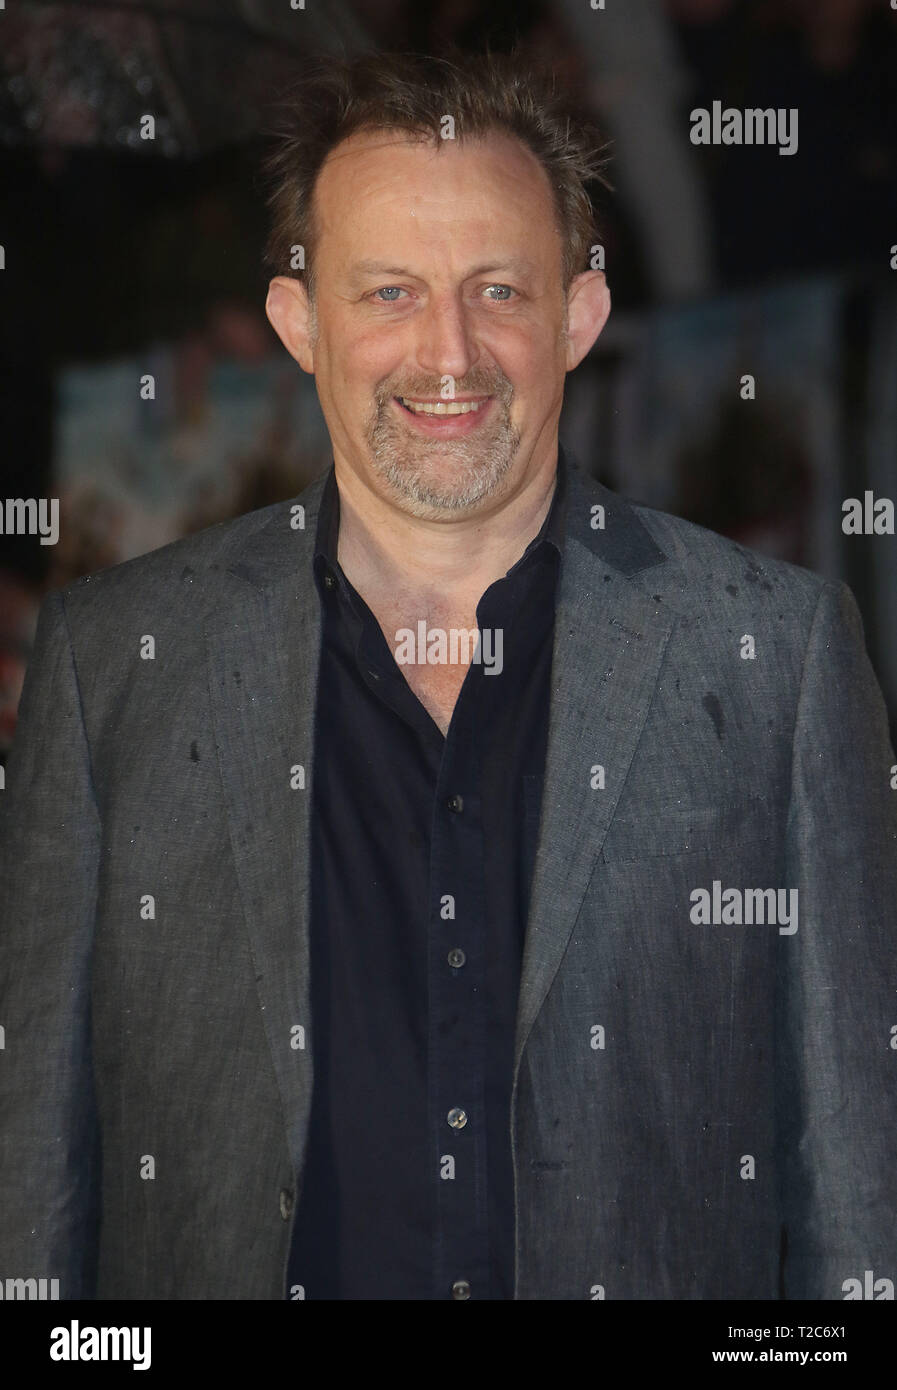 Jan 26, 2016 - London, England, UK - 'Dad's Army' World Premiere, Odeon Leicester Square - Red Carpet Arrivals Photo Shows: Writer Hamish McColl Stock Photo